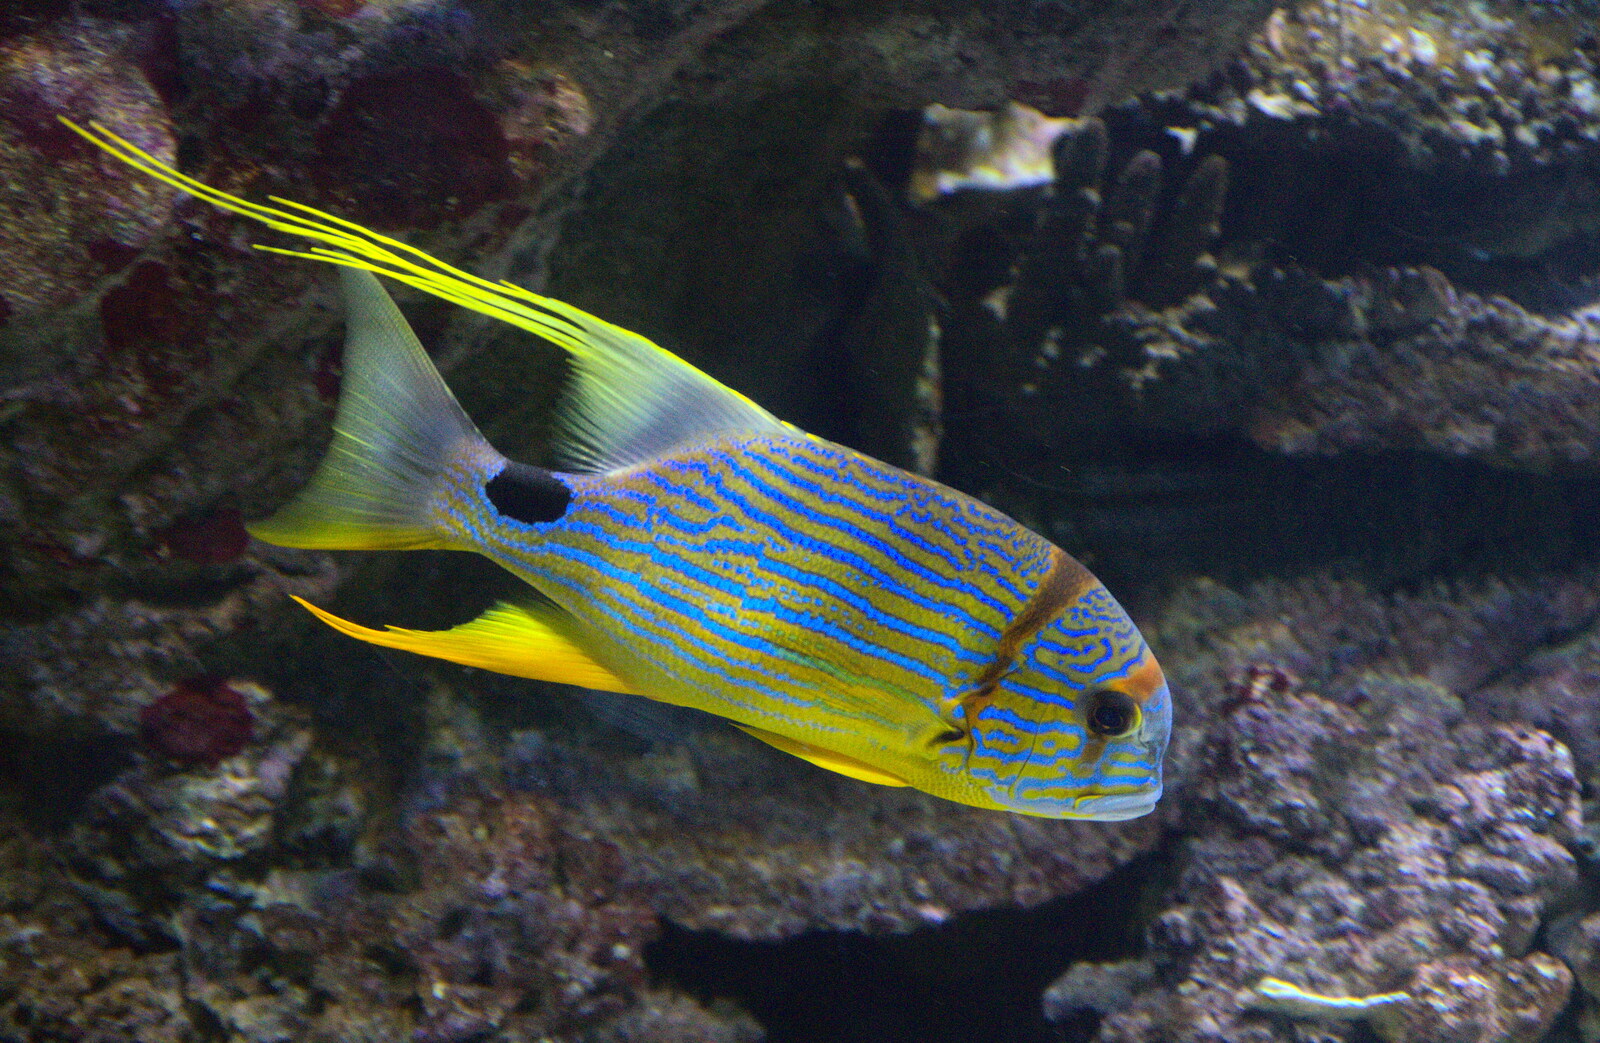 A striking yellow fish with blue stripes from L'Aquarium de Barcelona, Port Vell, Catalonia, Spain - 23rd October 2017